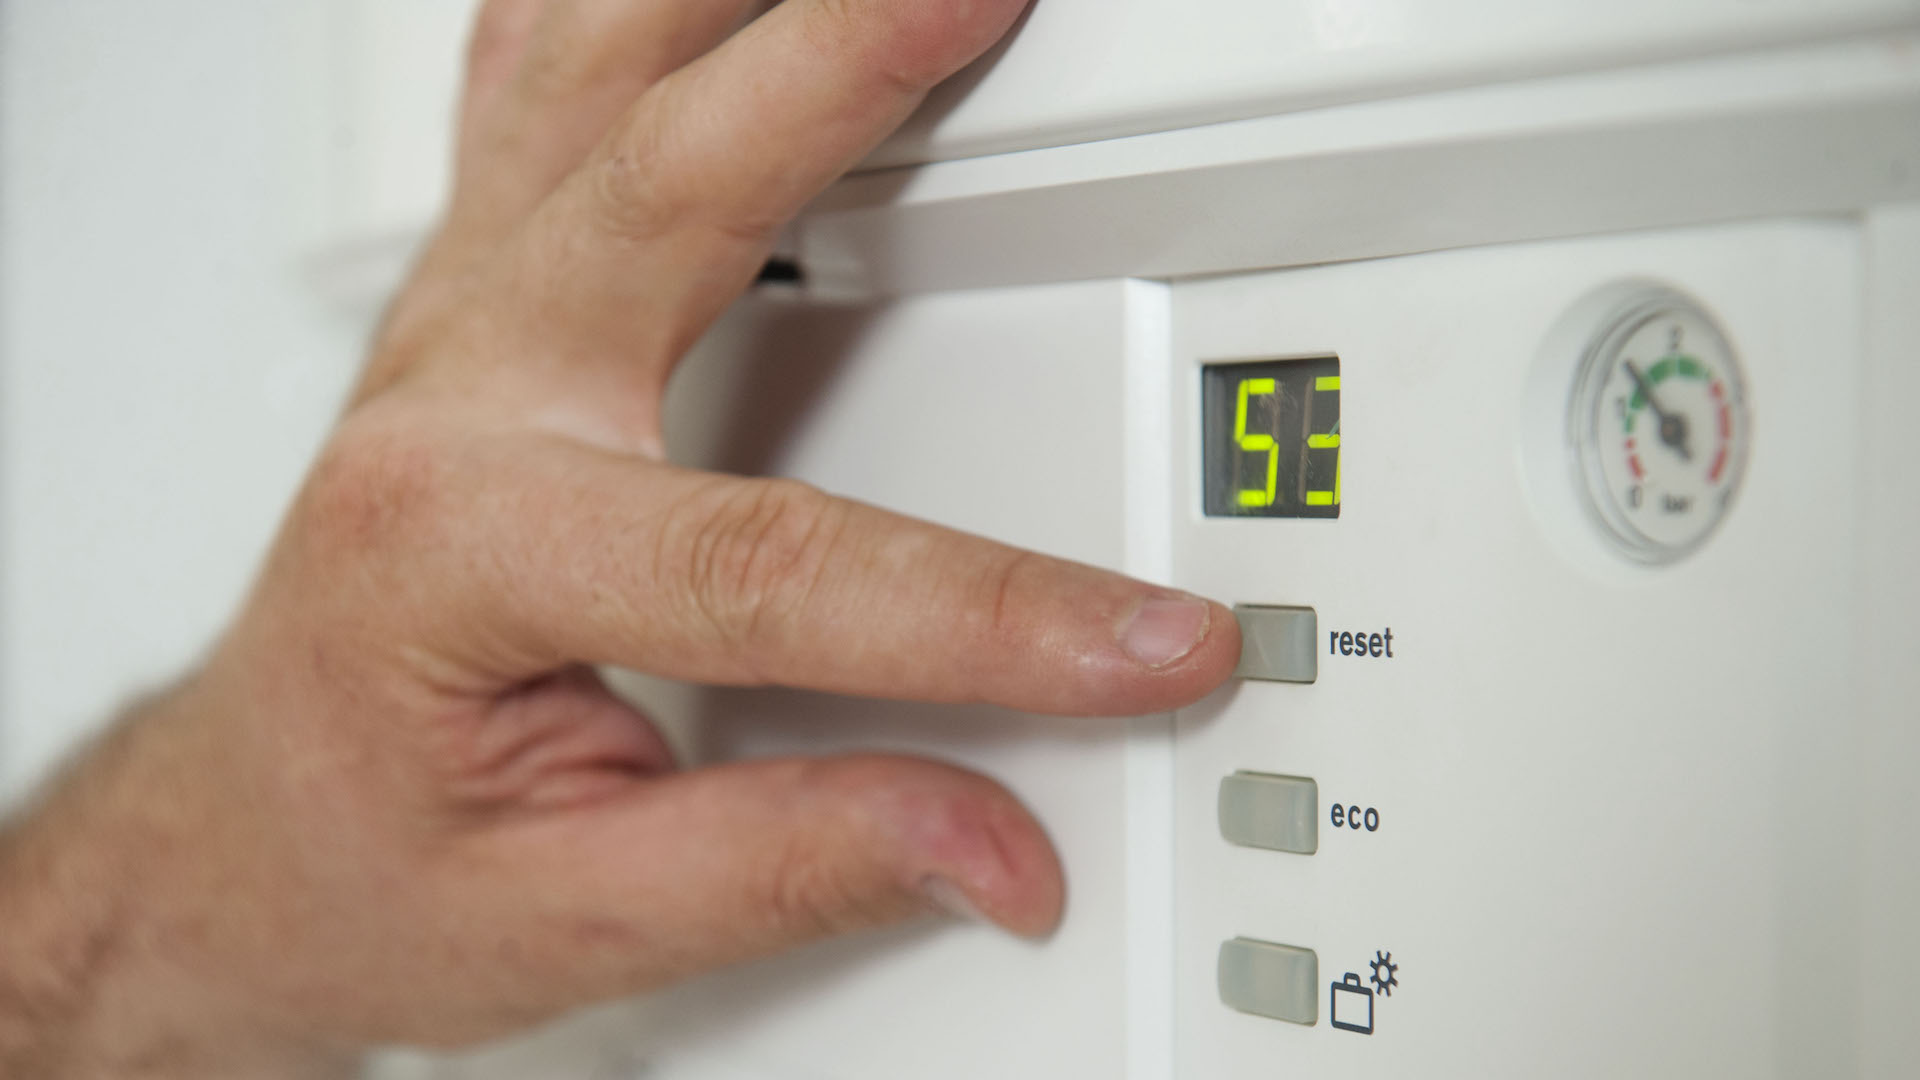 A hand points to buttons on a gas boiler